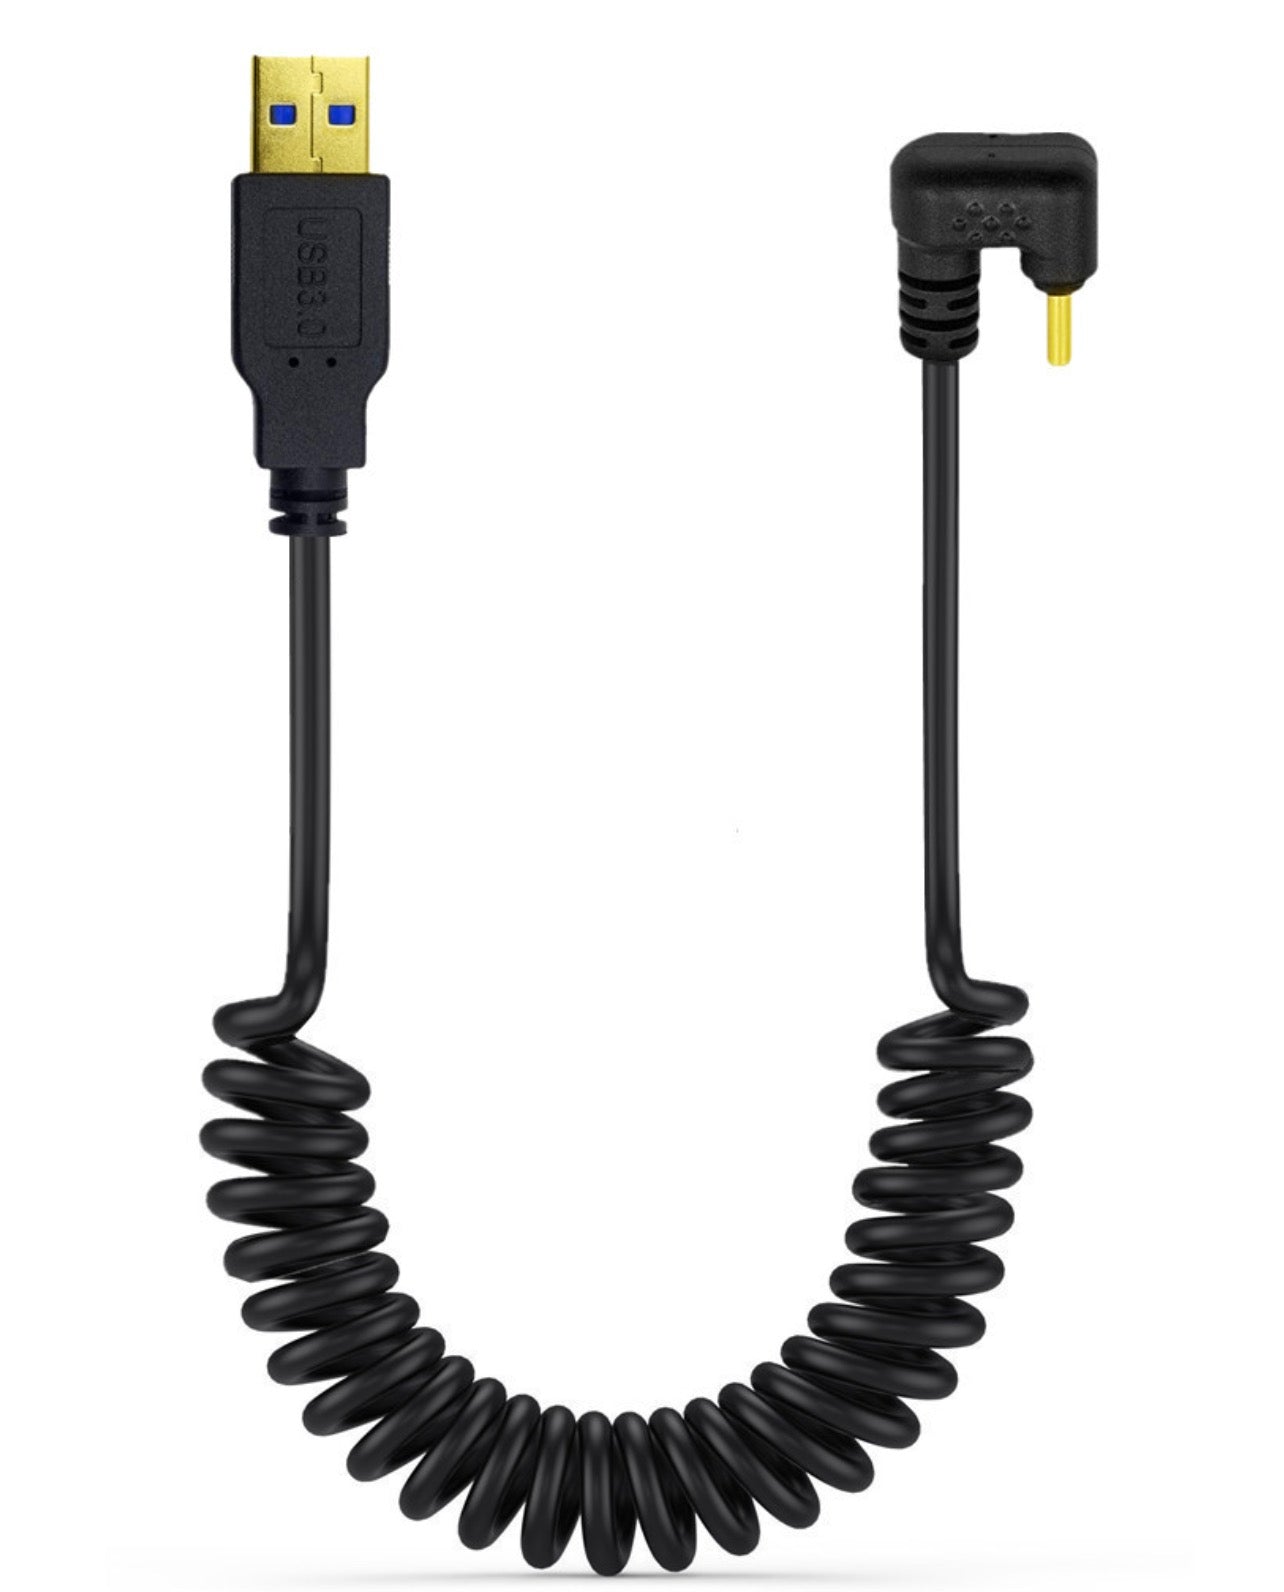 USB C Type-C Male U Shape to USB 3.0 A Male Coiled Cable